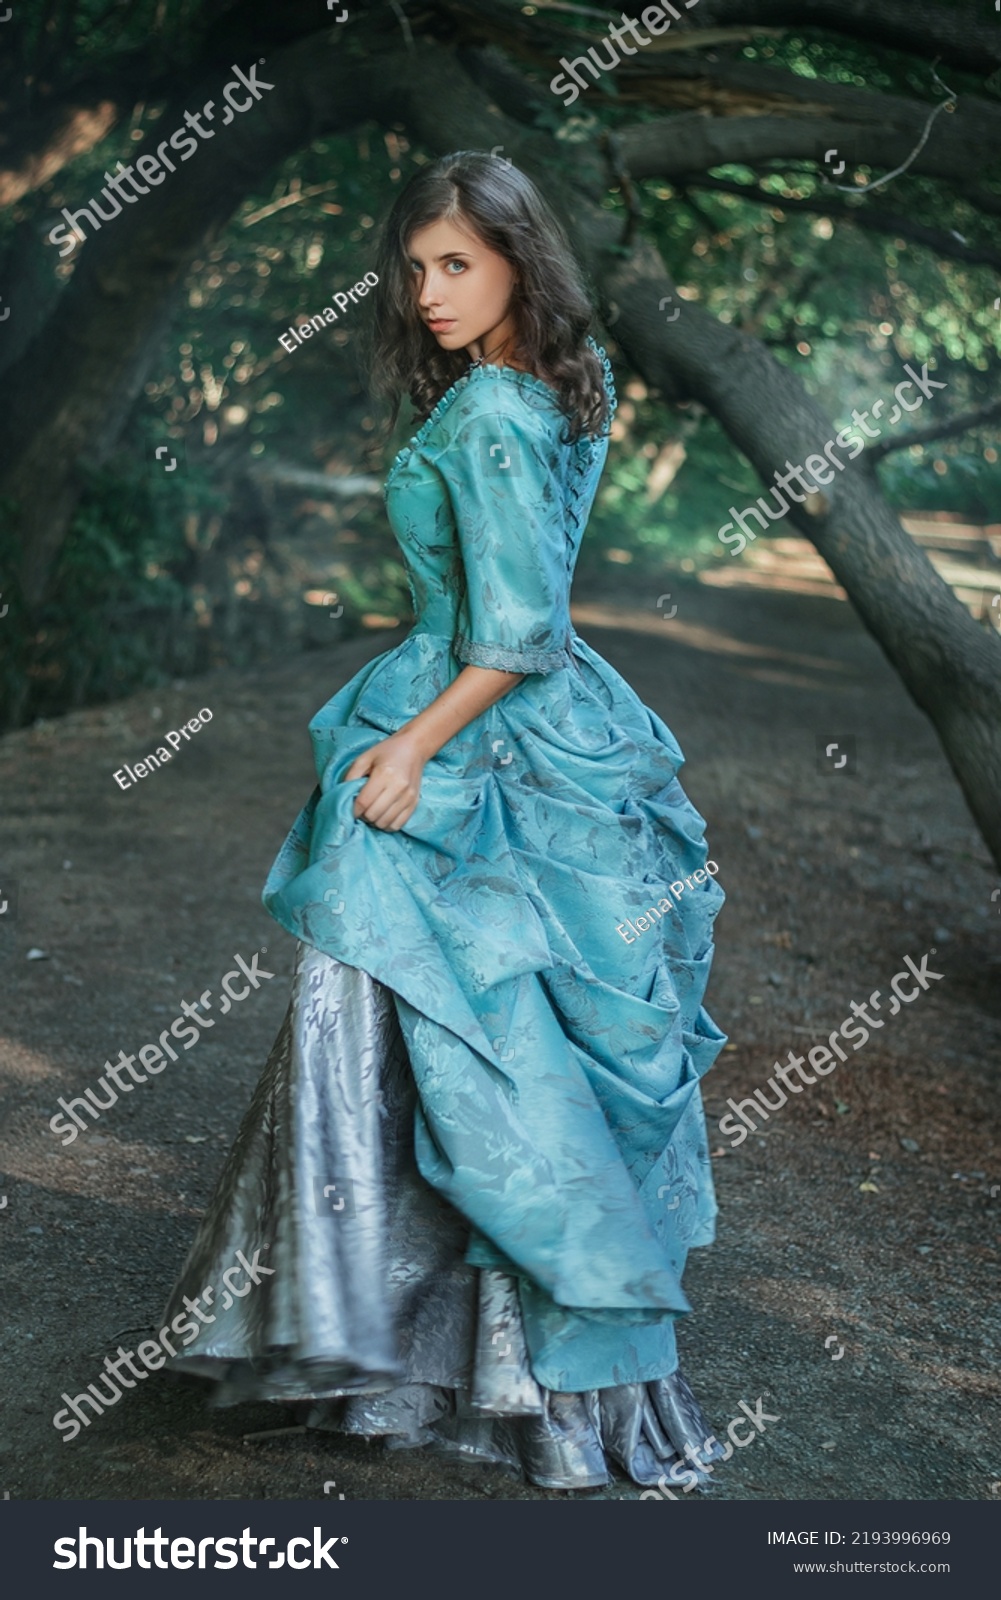 A young woman in a 19th century dress runs away along a forest path, a mystical atmosphere. Historical costume. Woman in a park or forest. #2193996969